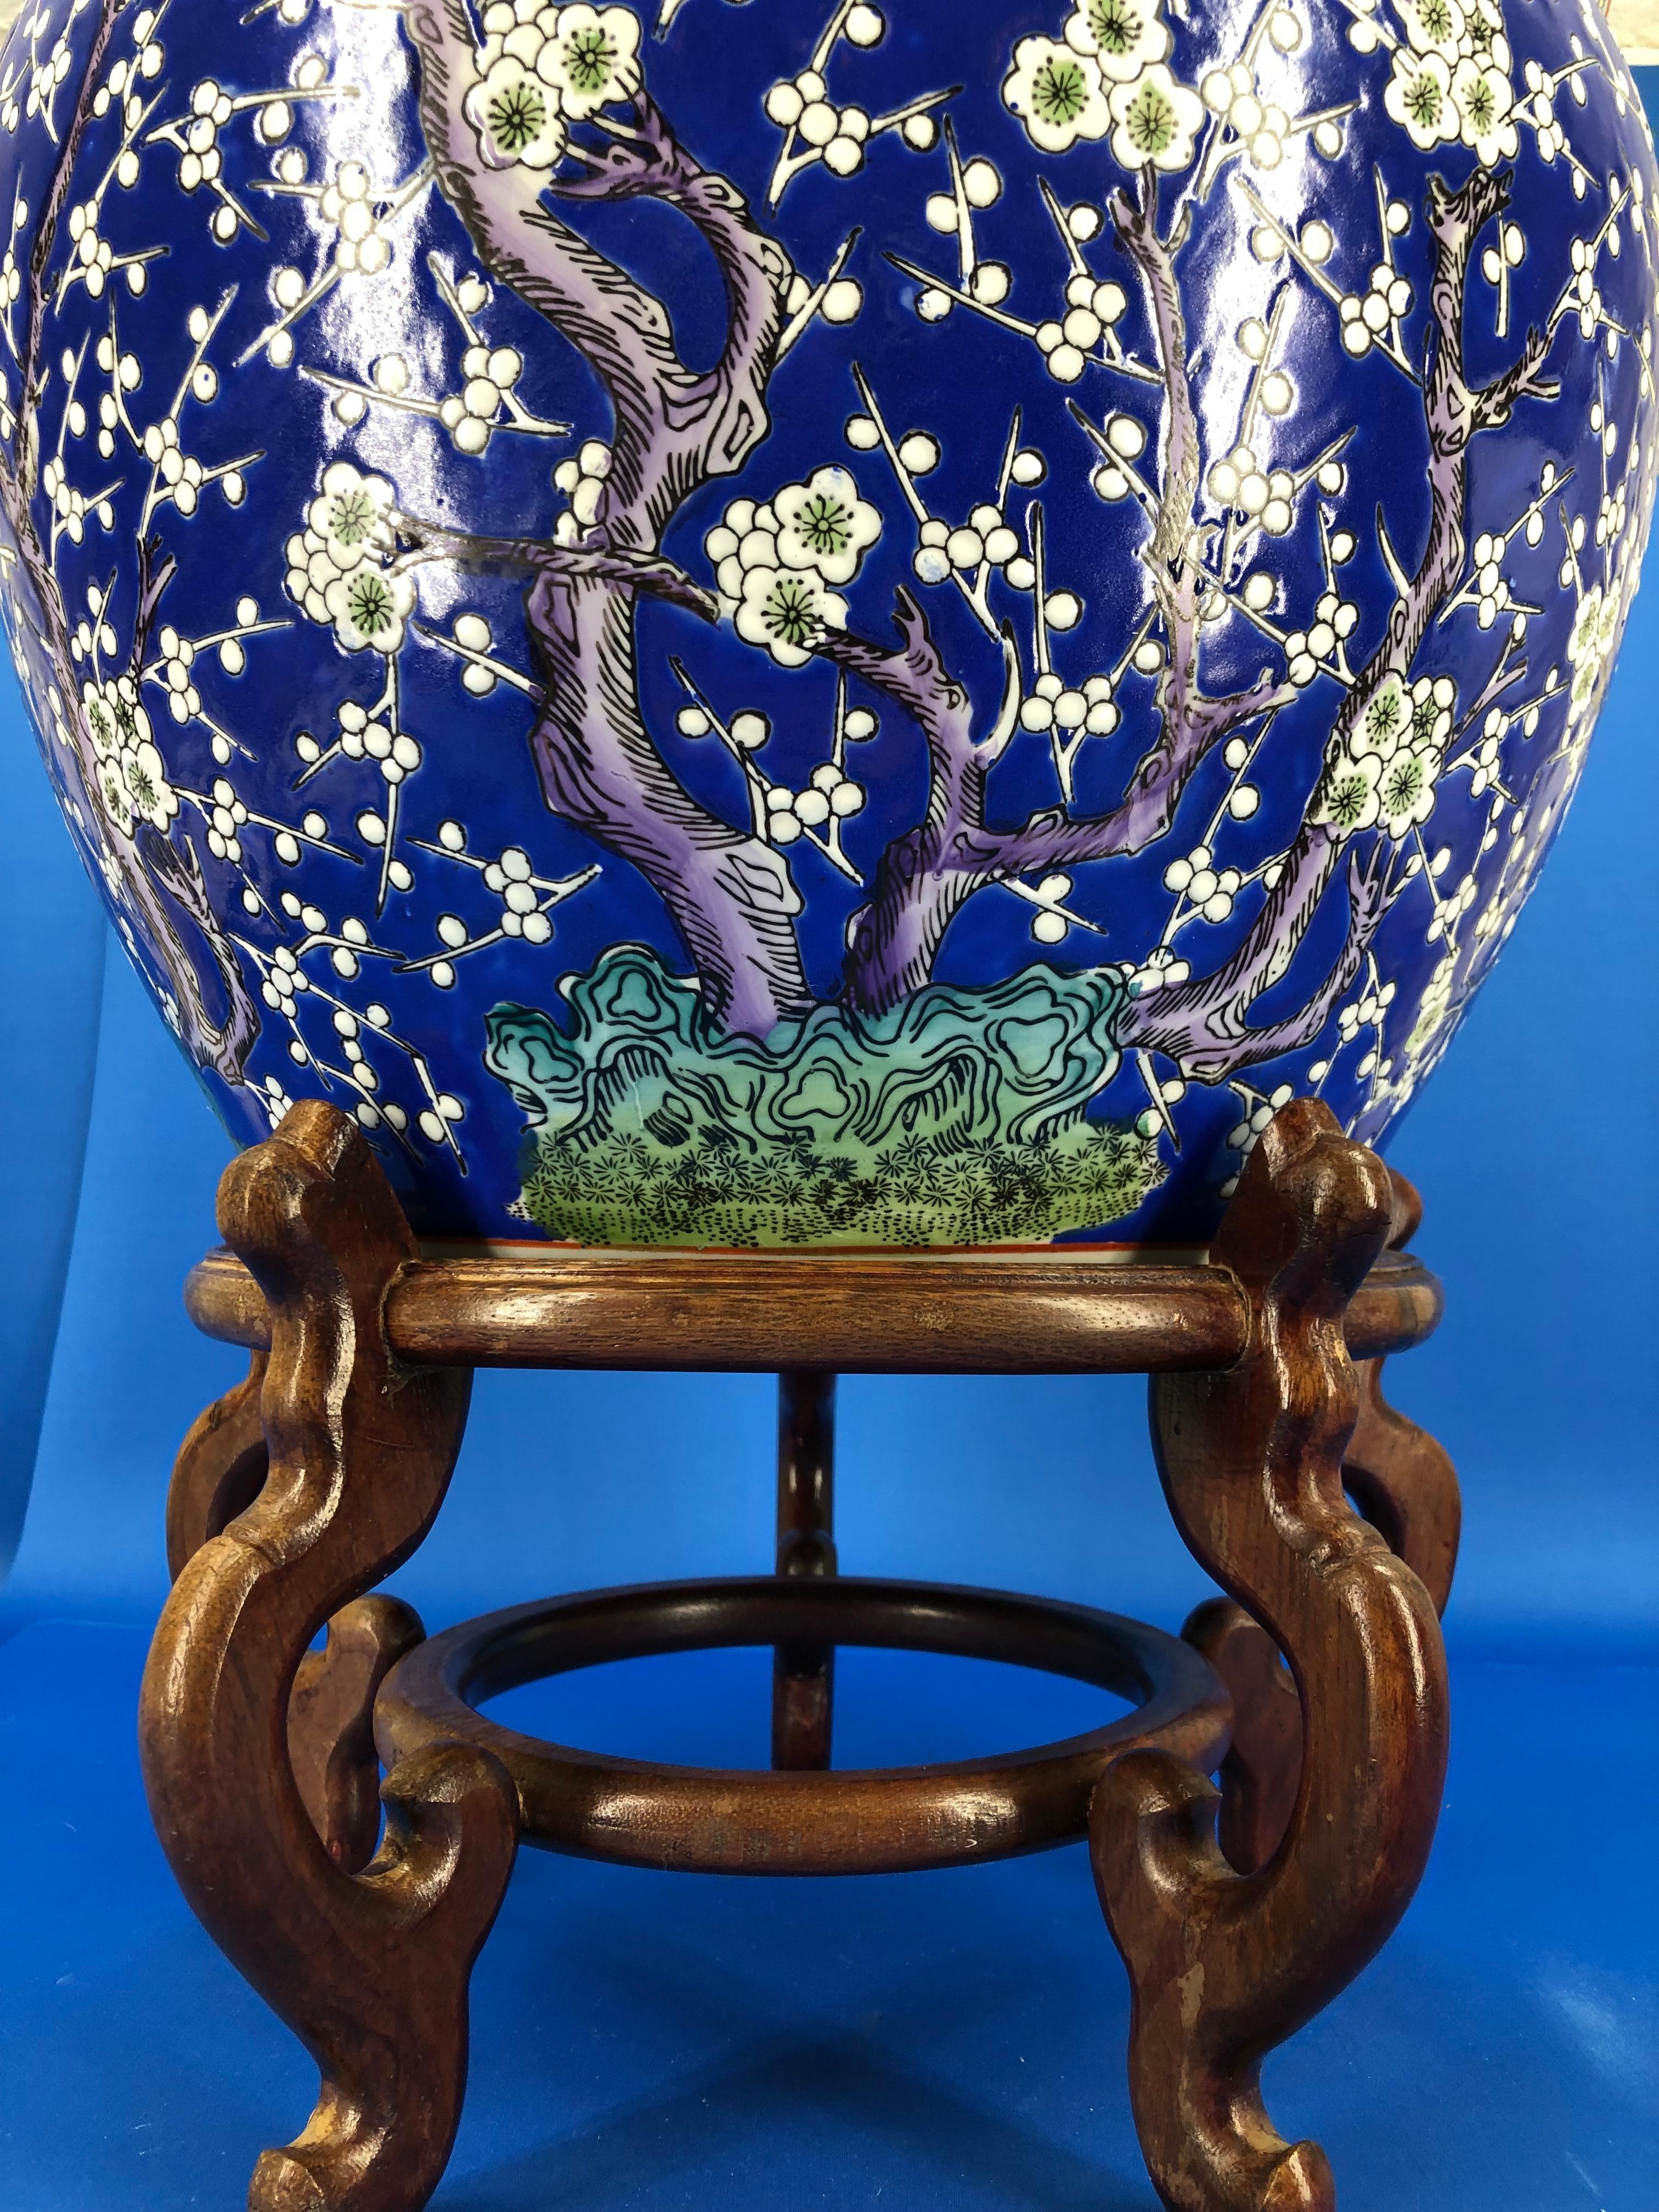 Large Chinese Blue Decorated Porcelain Jardinieres Planter on Wooden Stand 1